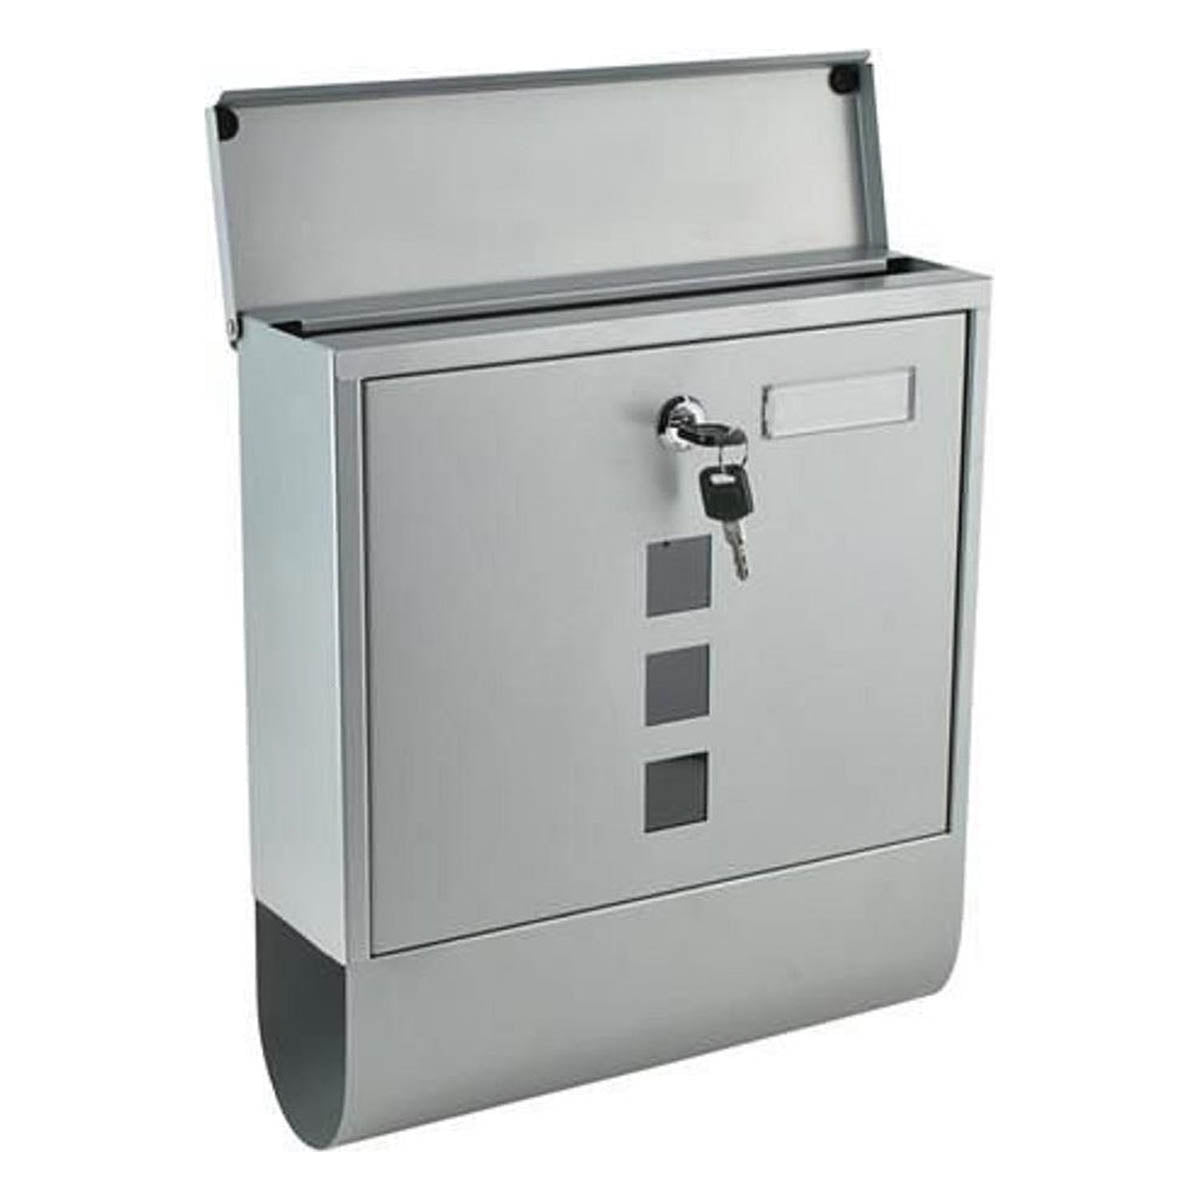 <tc>Ariko</tc> wall letterbox - stainless steel - with newspaper roll - gray - up to 8 newspapers